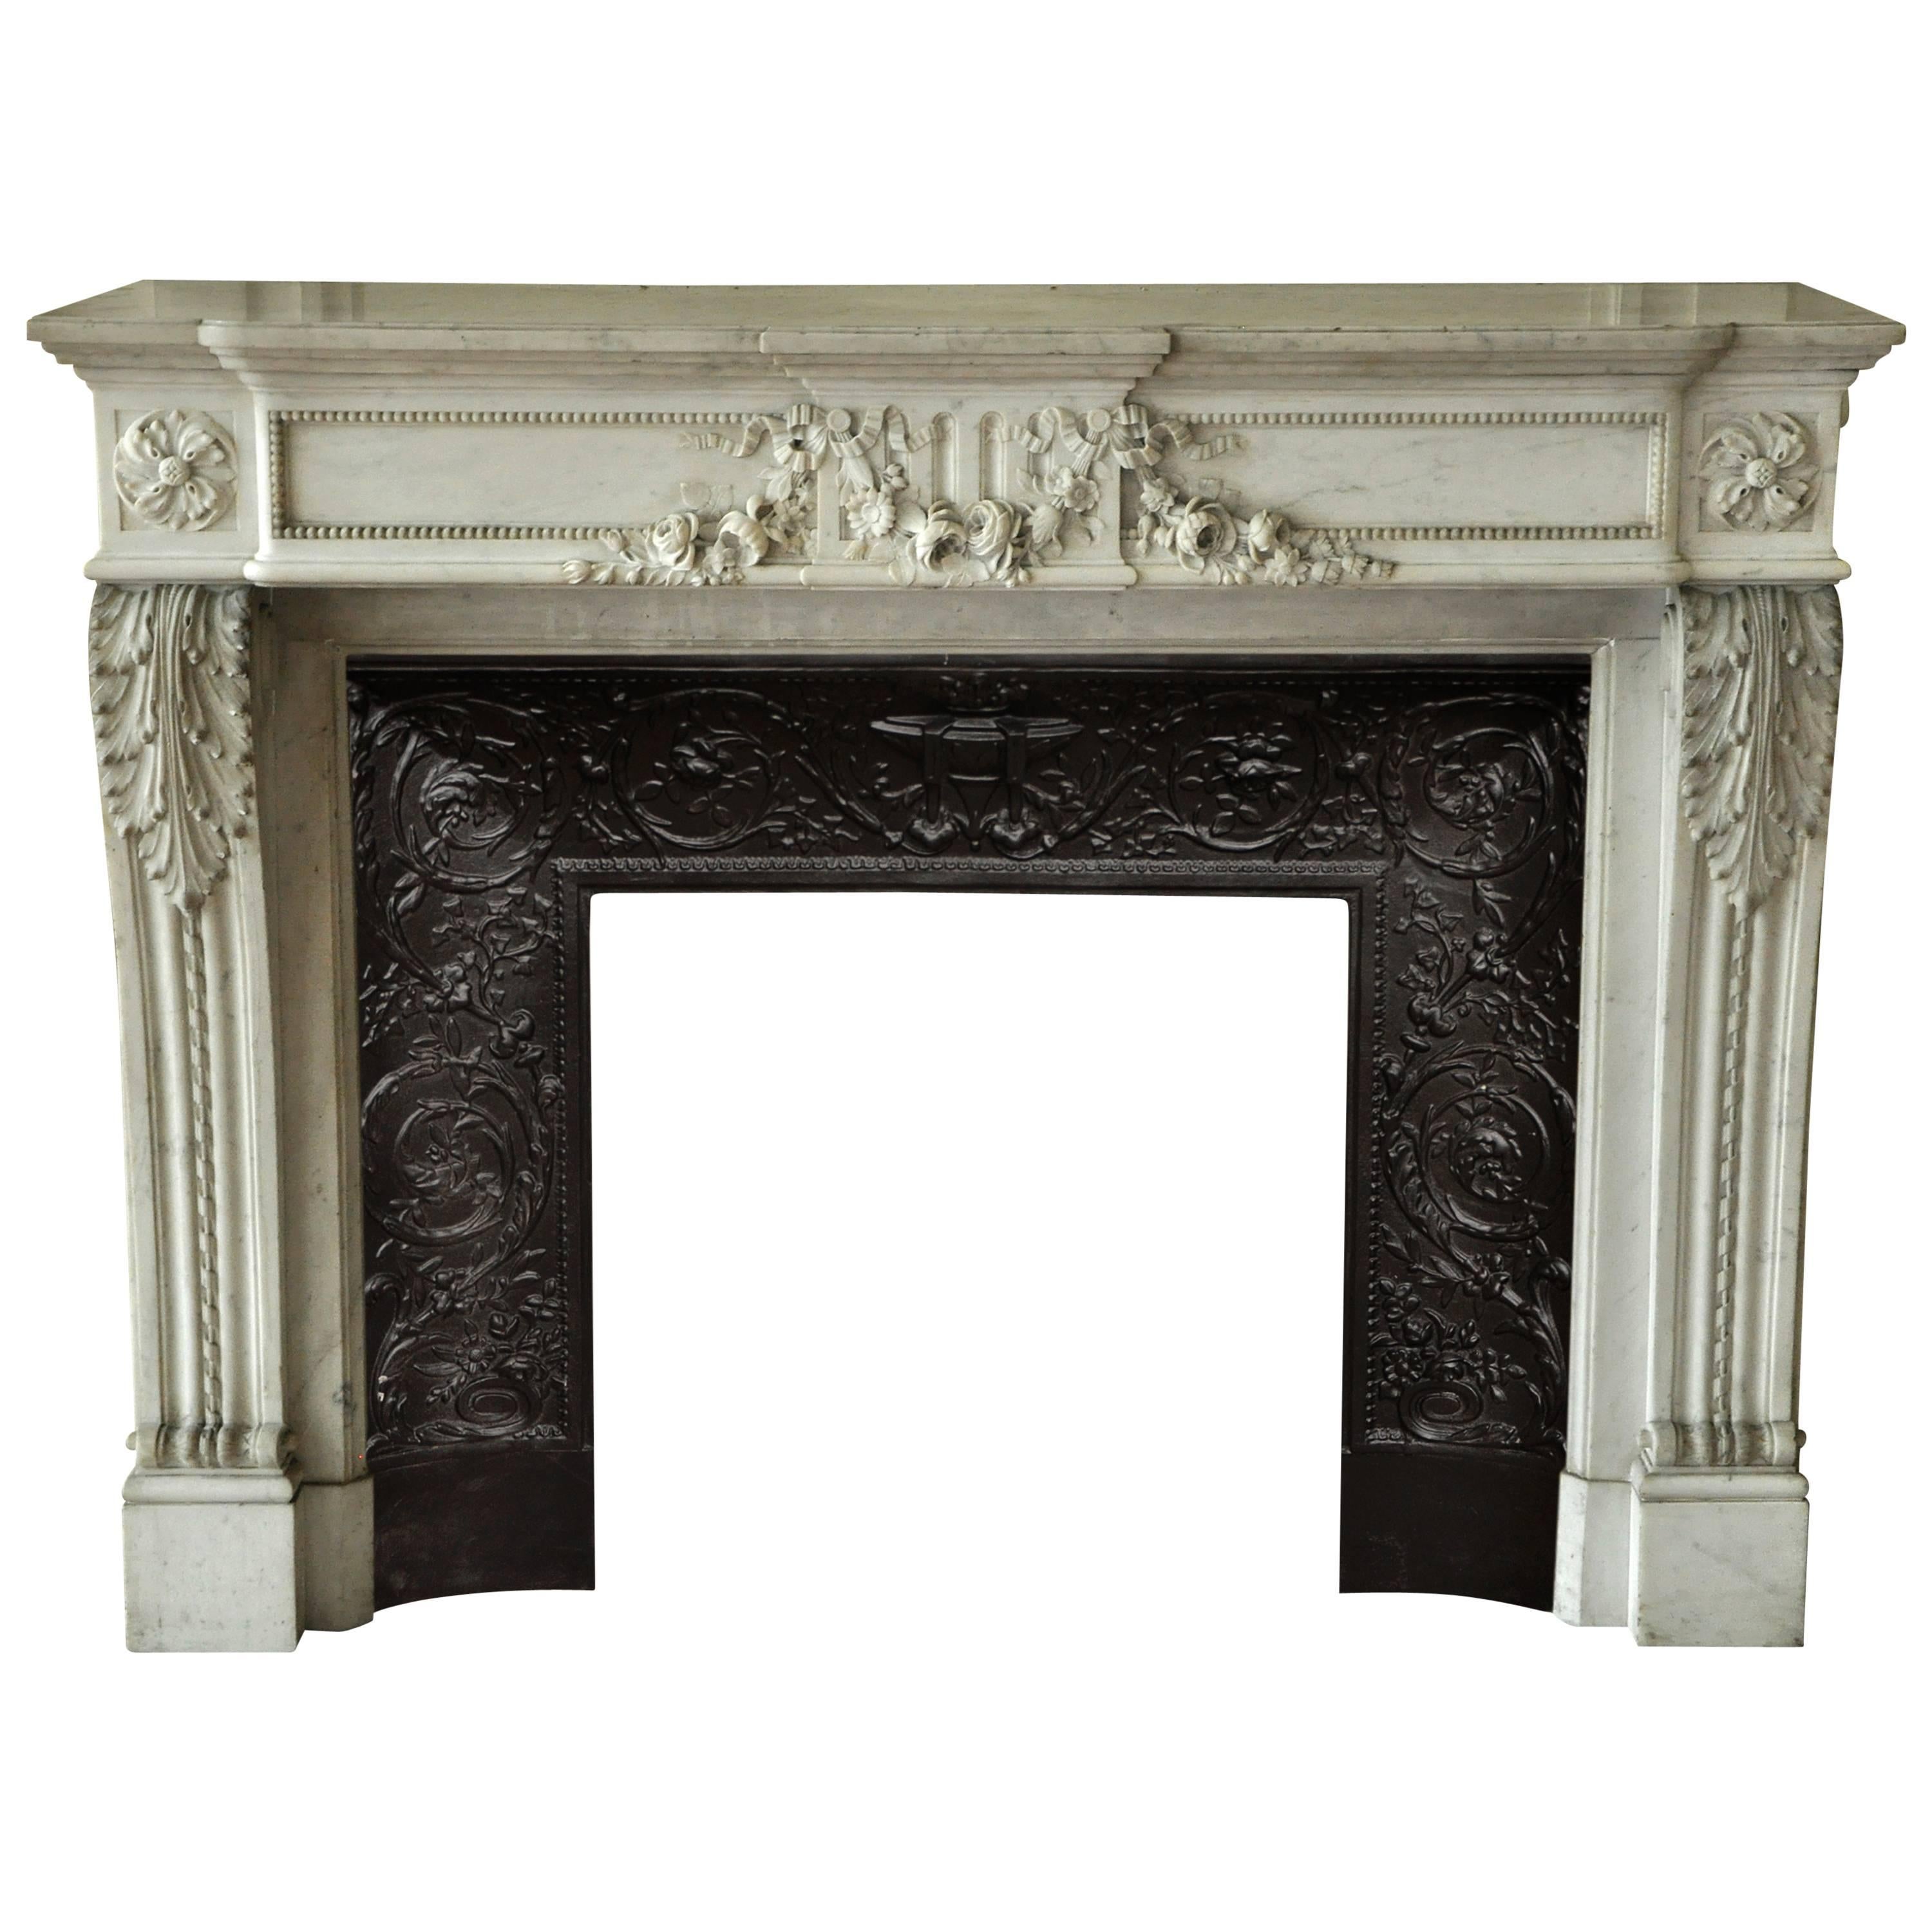 Louis XVI Style Fireplace in White Carrara Marble with Carved Garland of Flowers